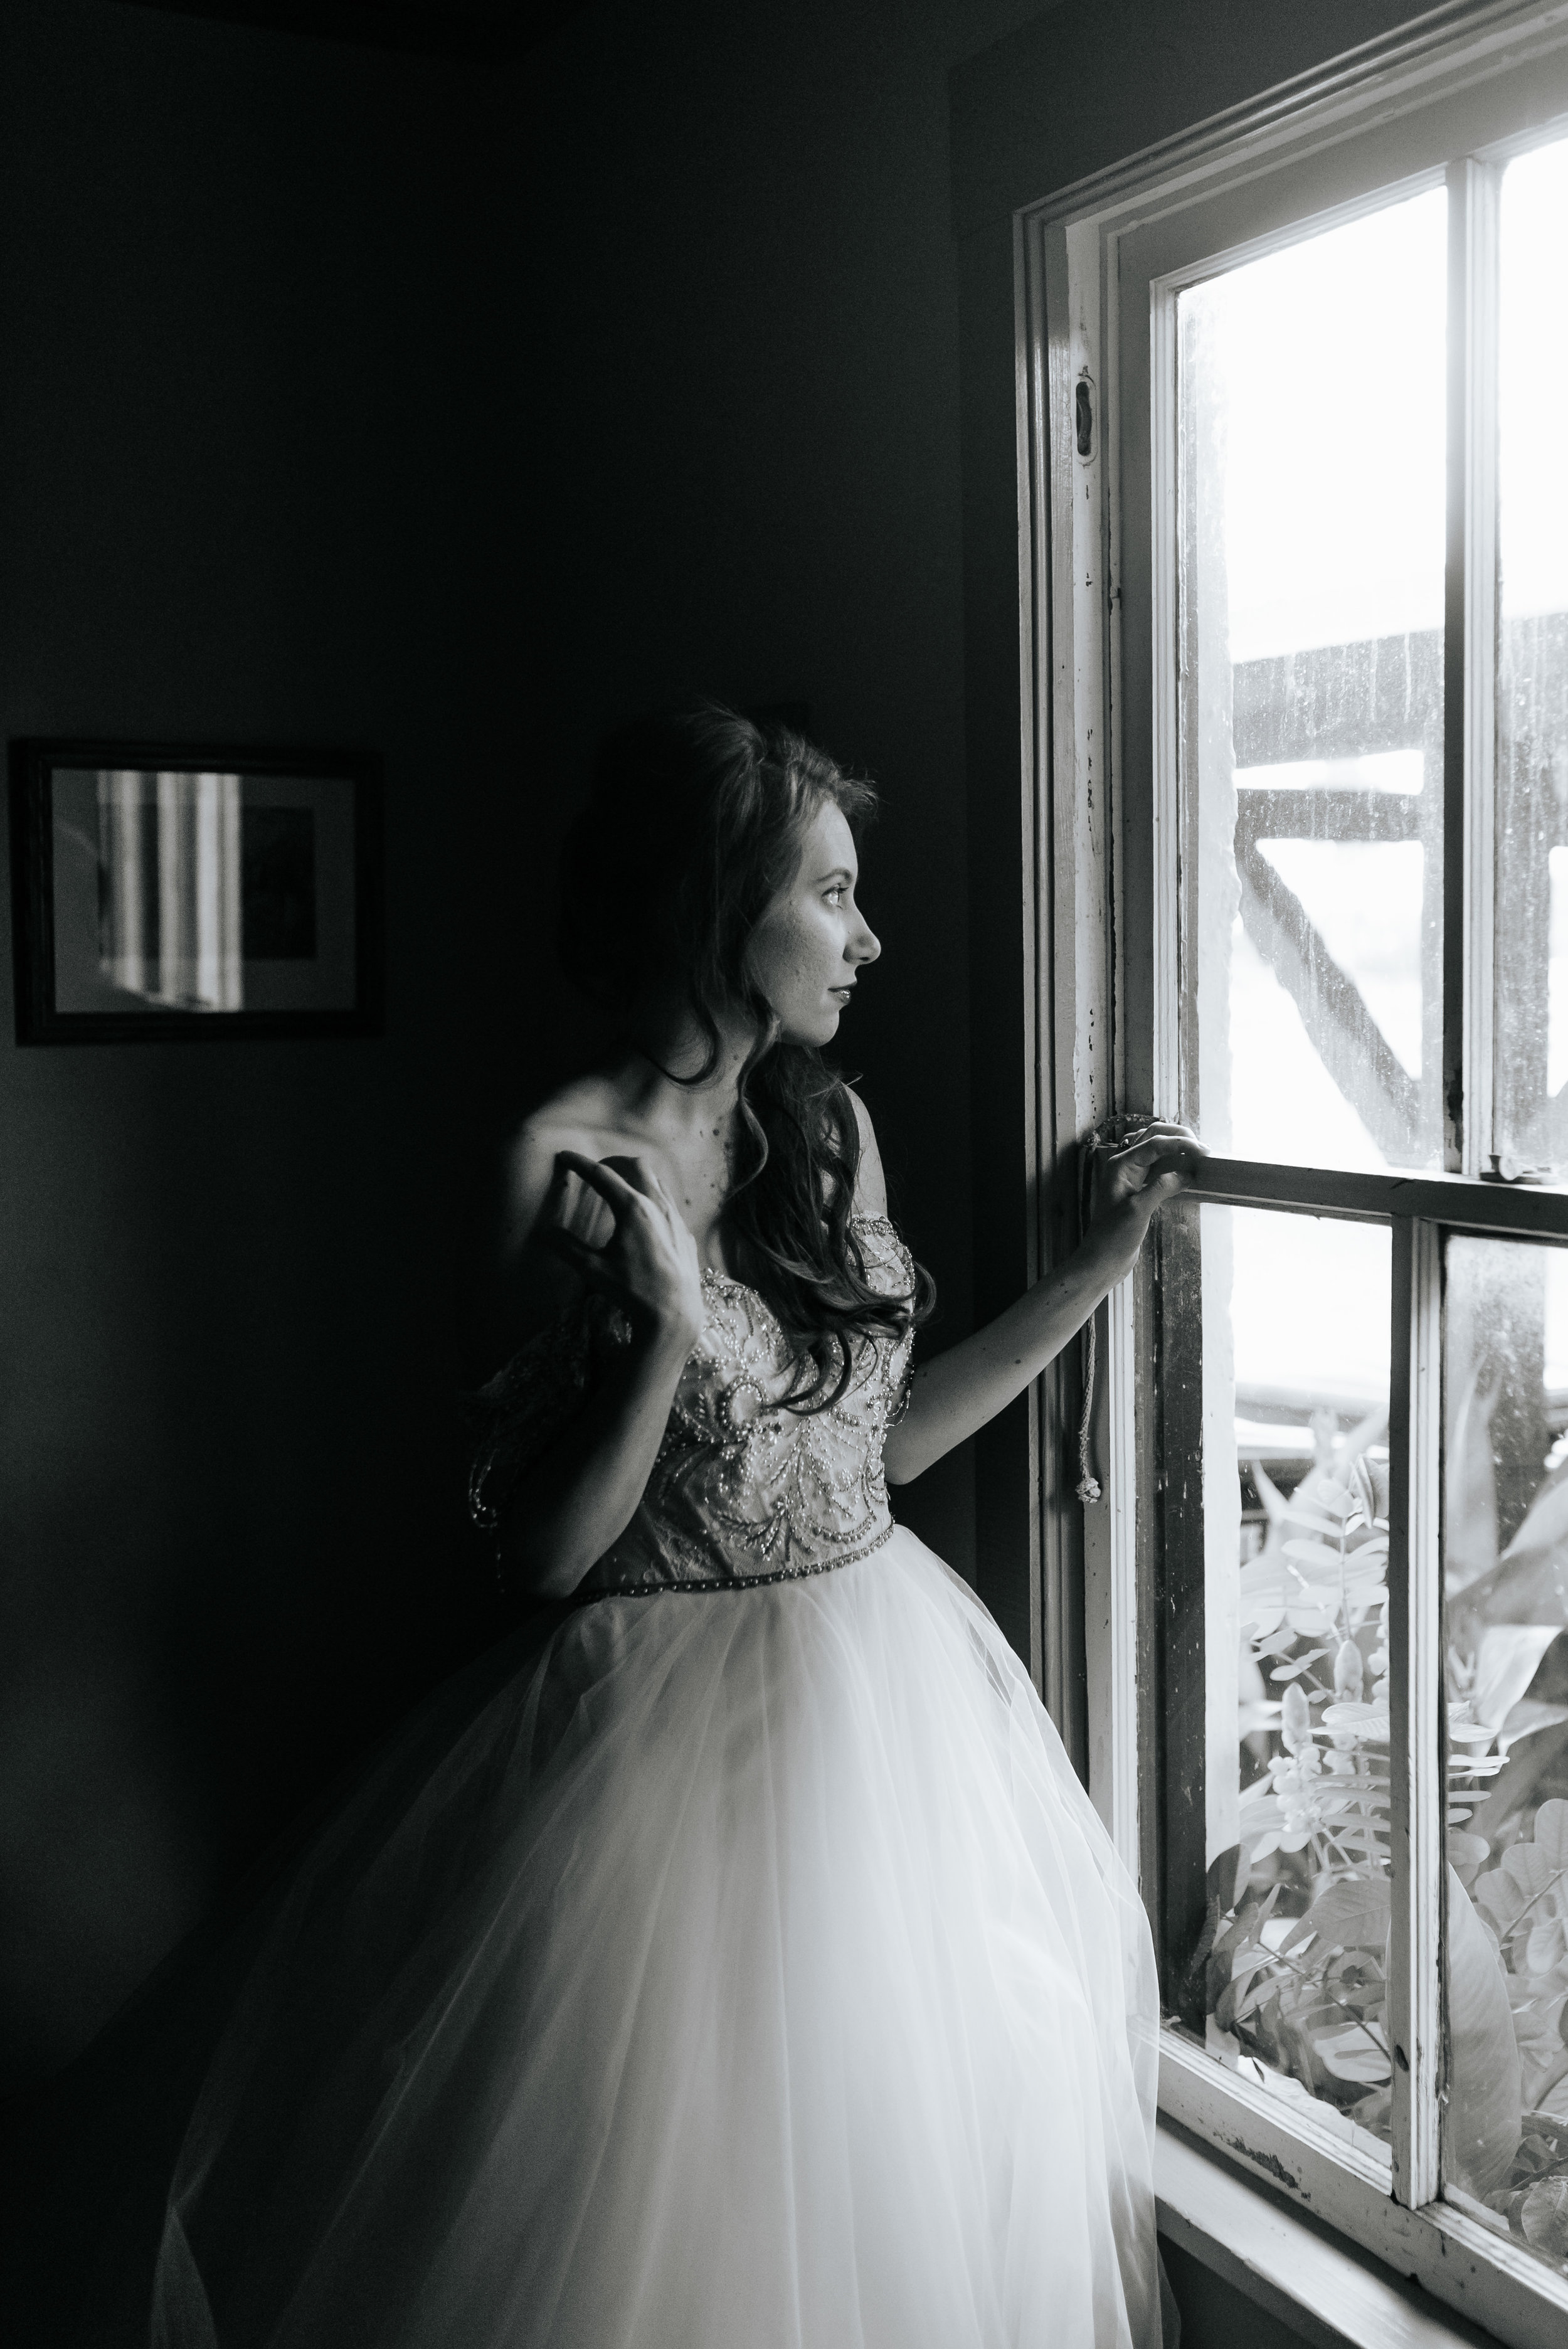 Grant-Station-Styled-Shoot-Whimsical-Moody-Fairytale-Wedding-Photography-by-V-9675.jpg